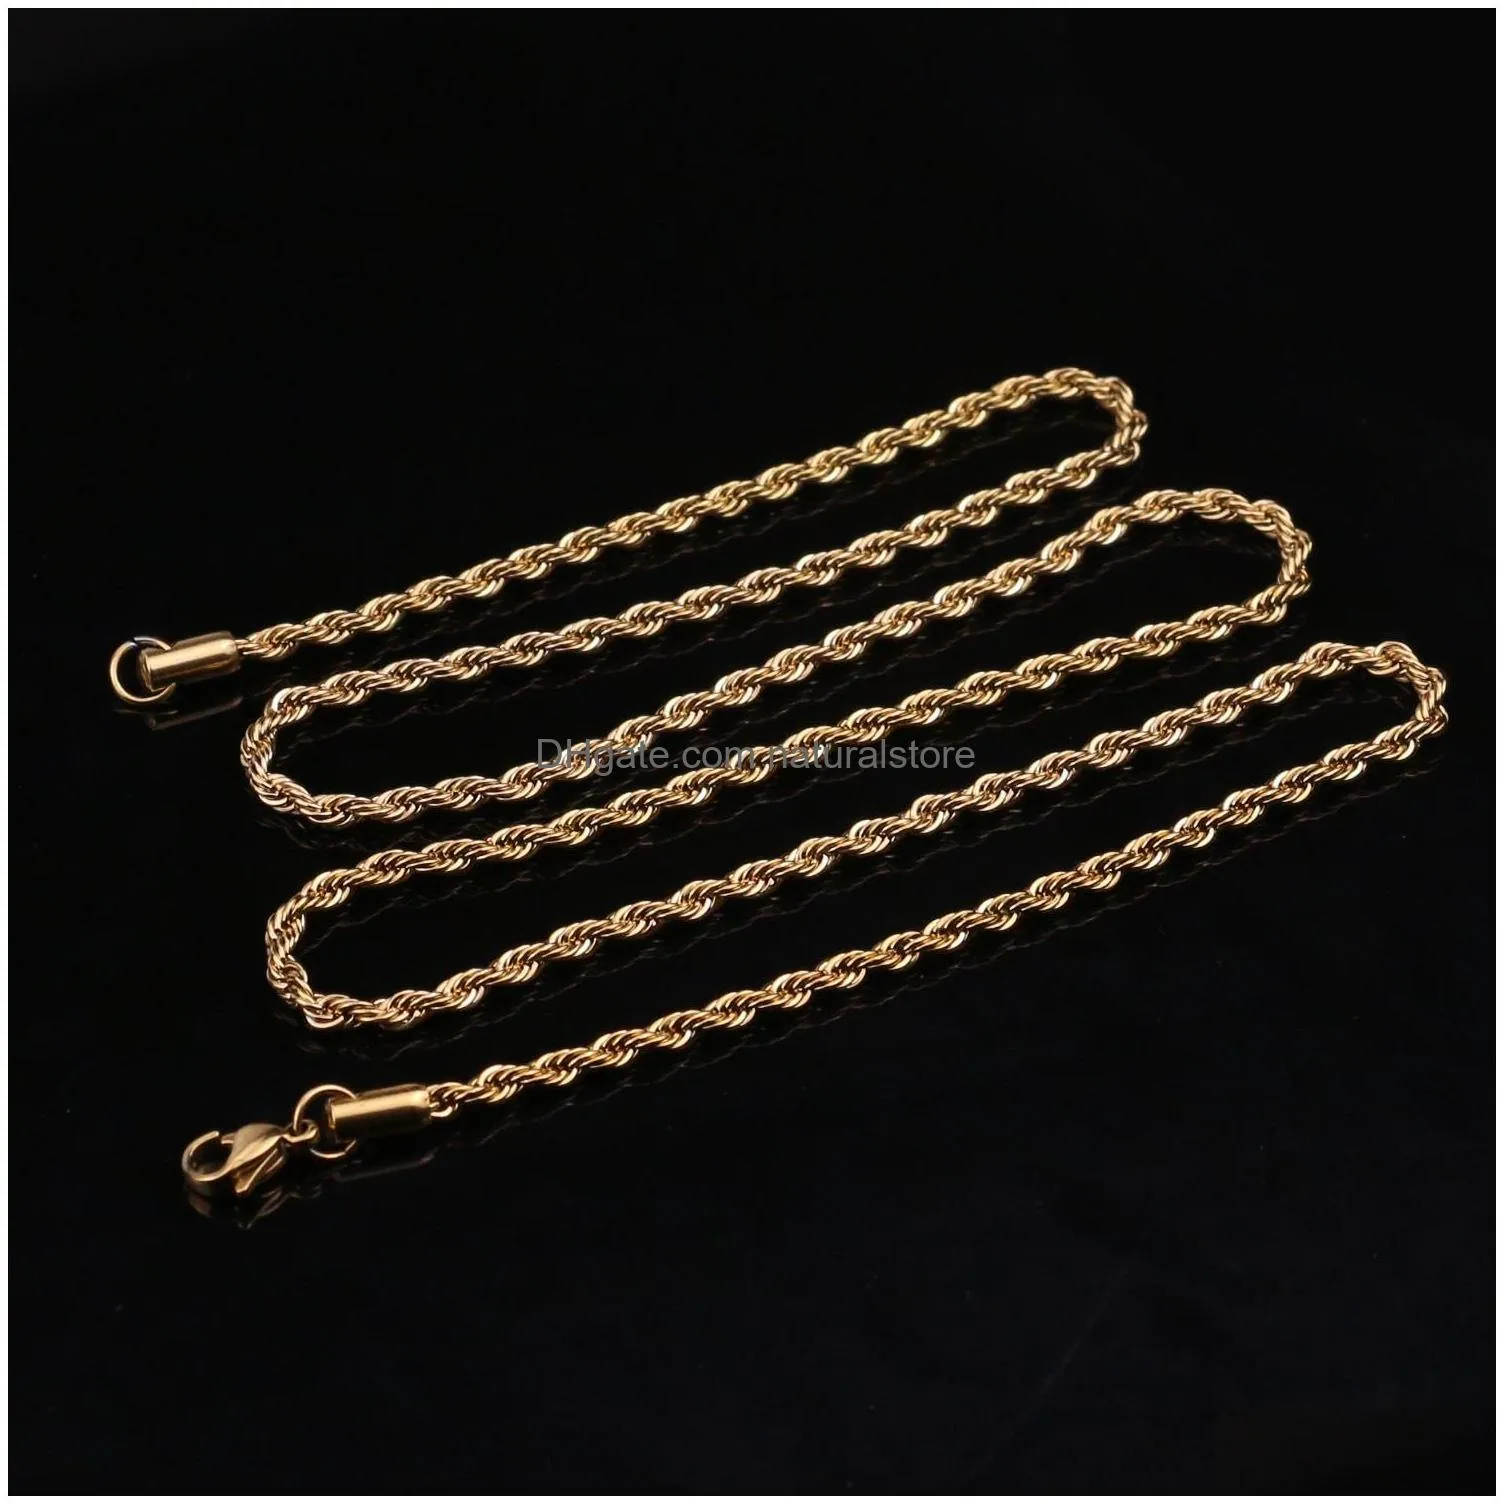 Chains 5-7Mm Stainless Steel Twisted Rope Gold Chain Necklaces For Men Women Hip Hop Titanium Thick Choker Fashion Party Jewelry Gift Dhelk